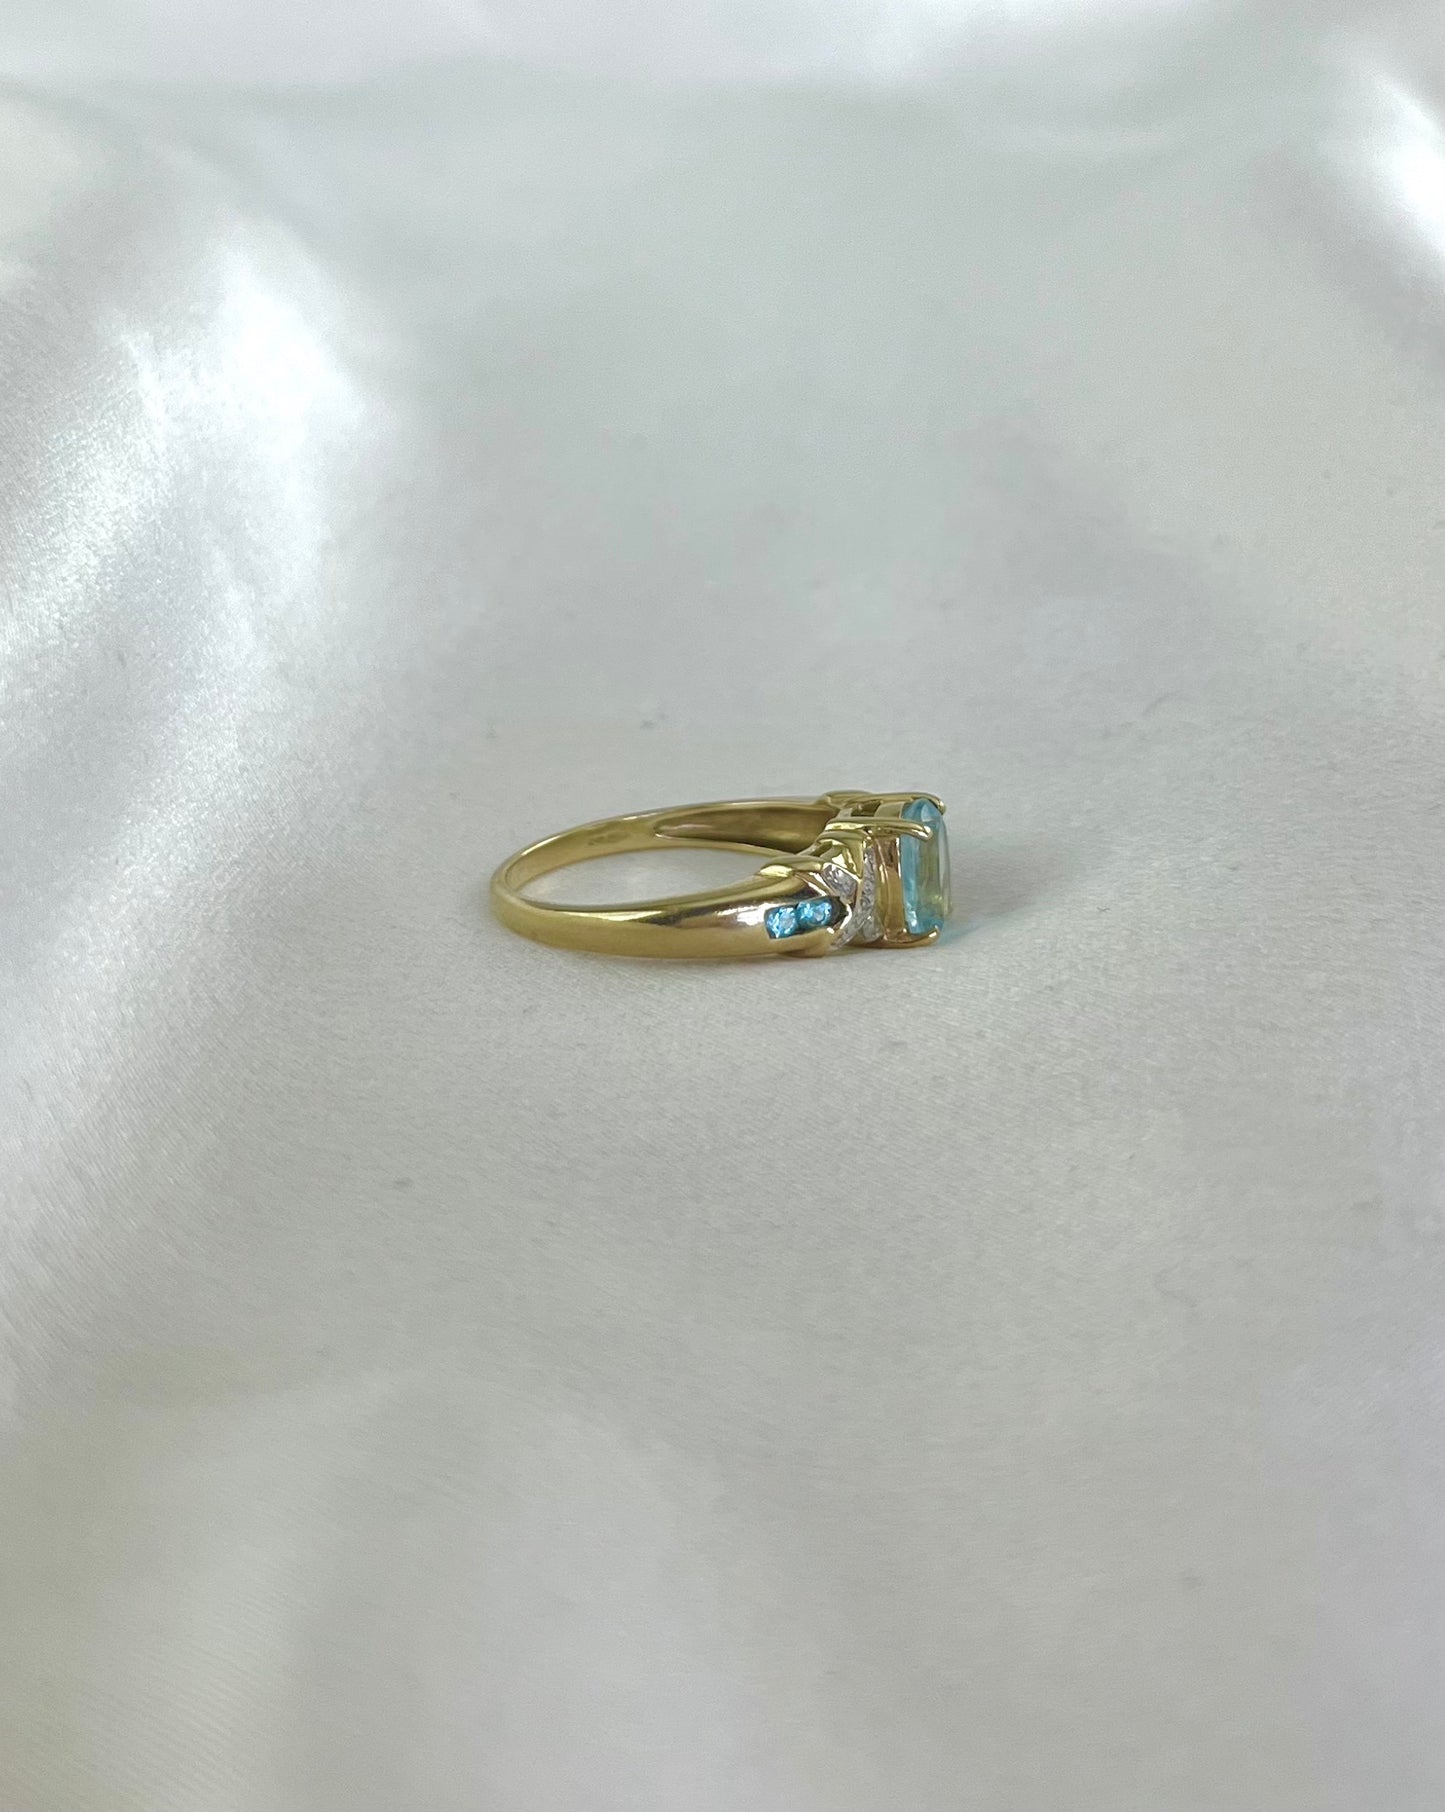 Vintage 9ct Gold Blue Topaz and Diamond Dress Ring, Size Q